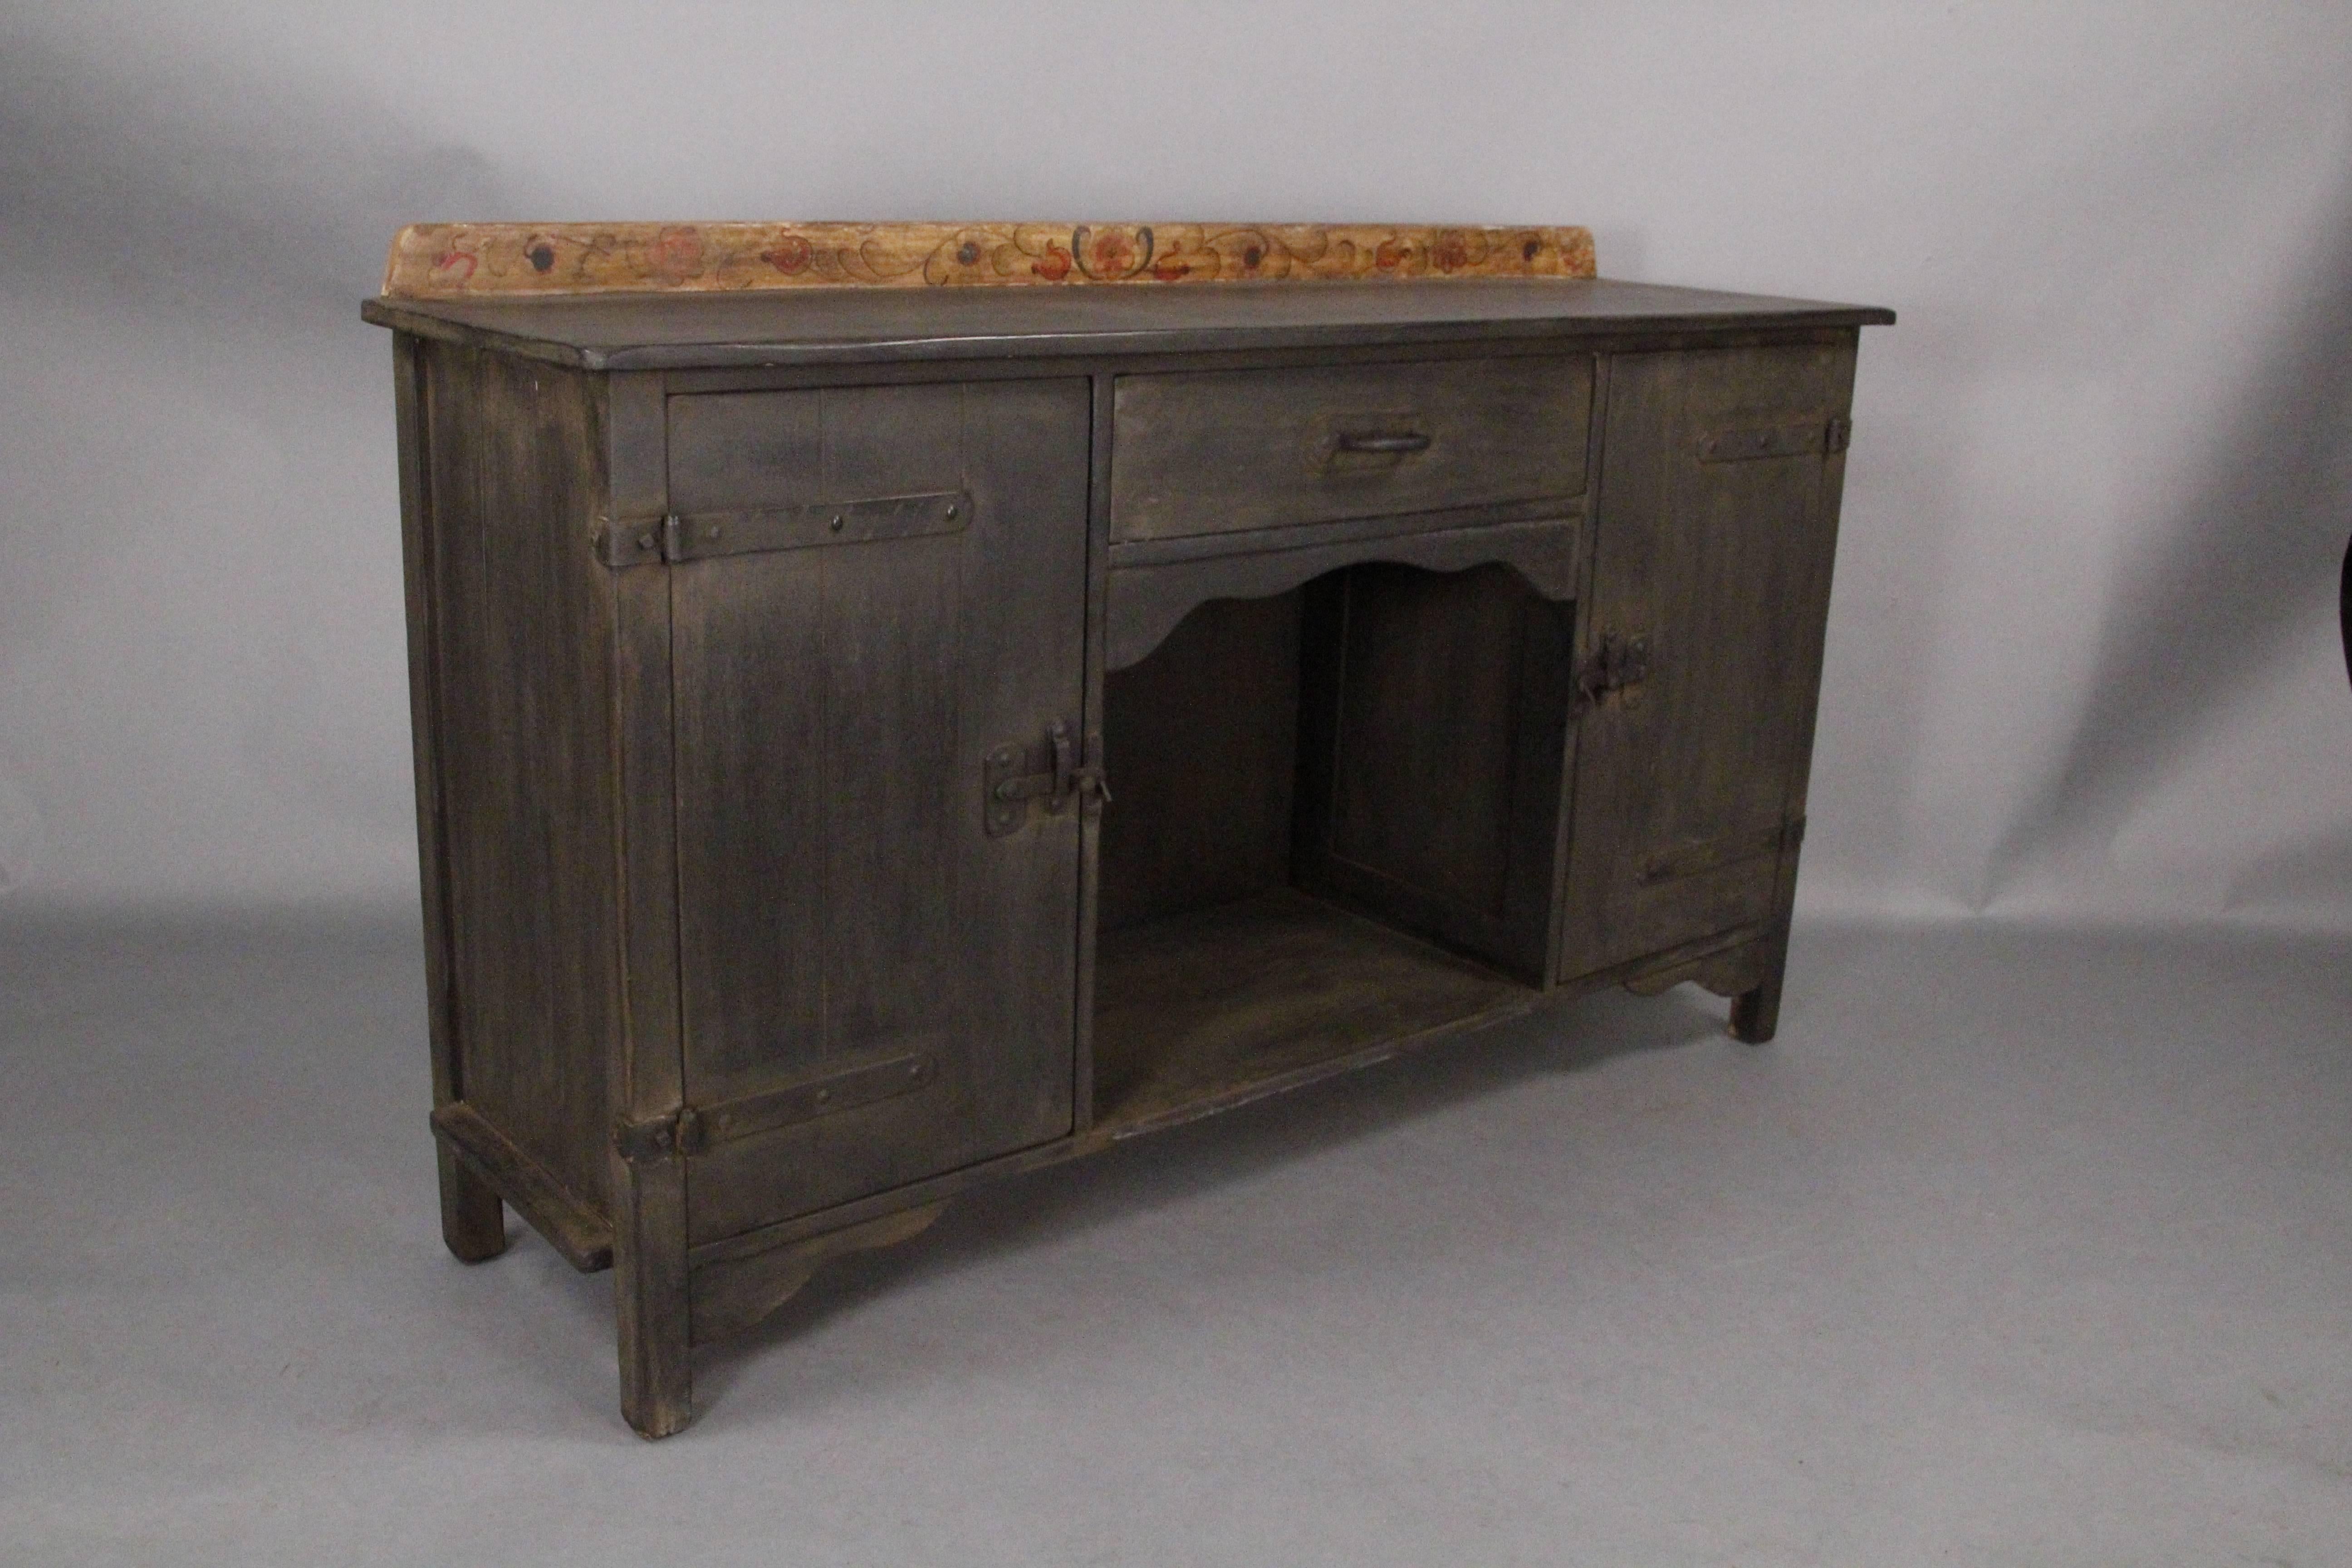 Sideboard with great iron hardware and hand-painted back rail, circa 1930s. Restored finish. Signed.